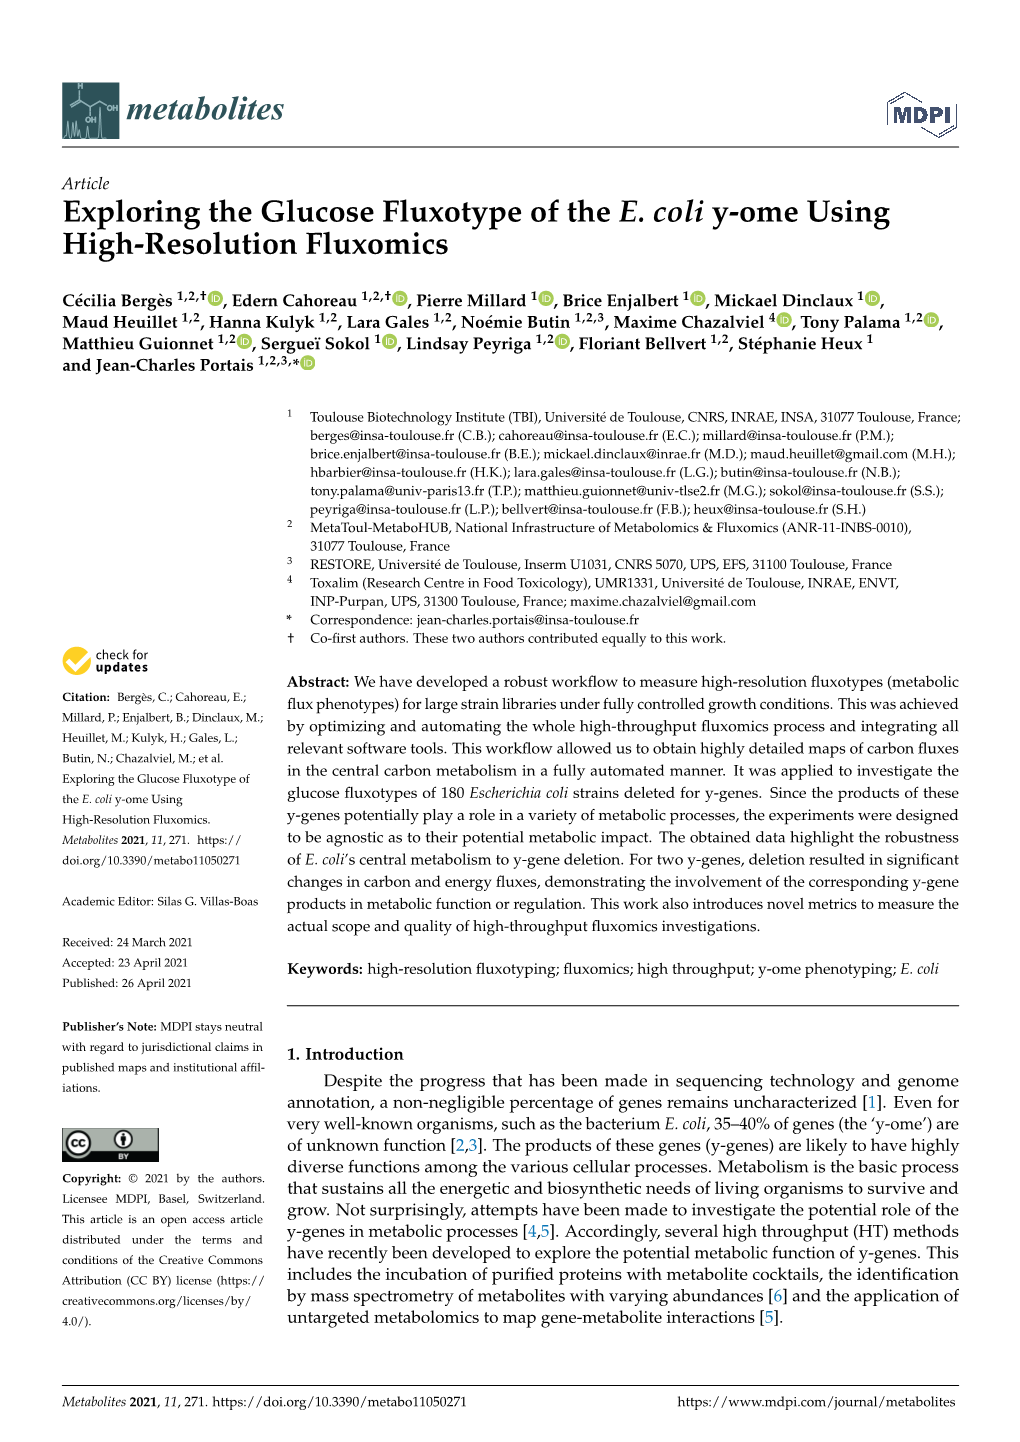 Exploring the Glucose Fluxotype of the E. Coli Y-Ome Using High-Resolution Fluxomics